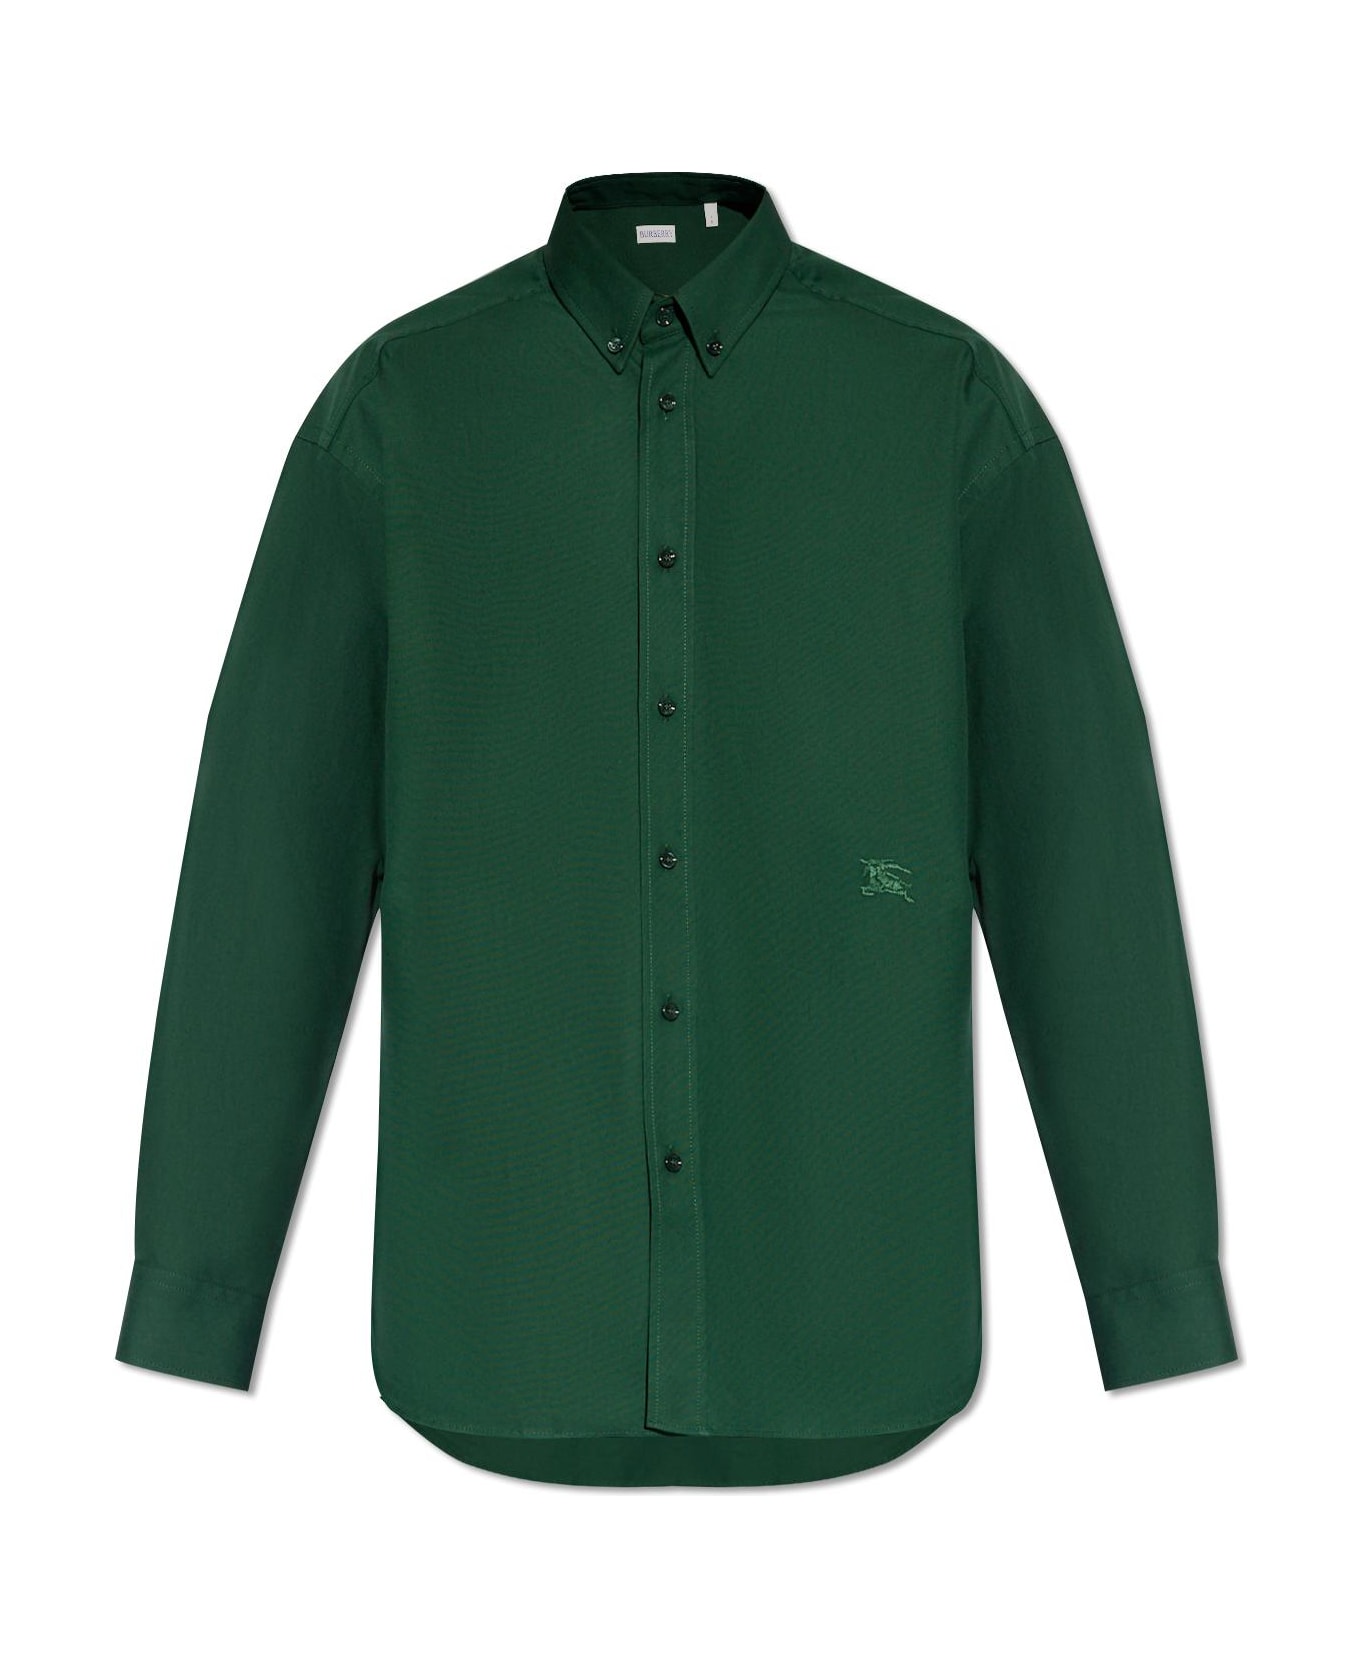 Burberry Embroidered Shirt - GREEN